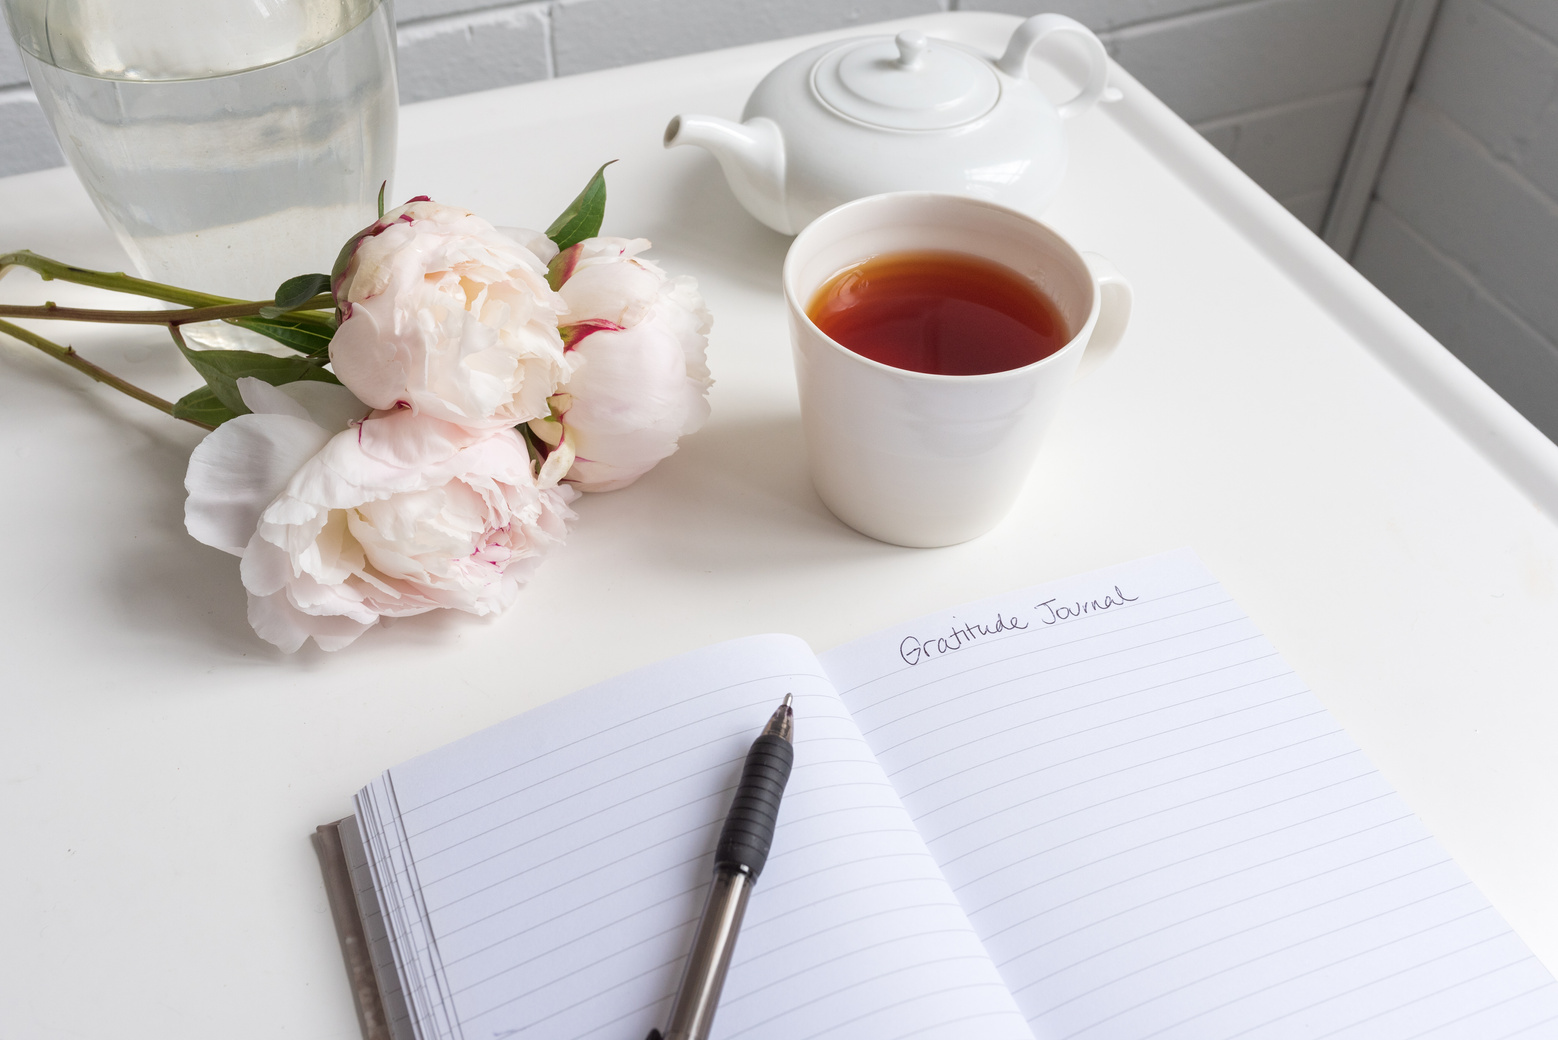 Gratitude journal with peonies and tea on table